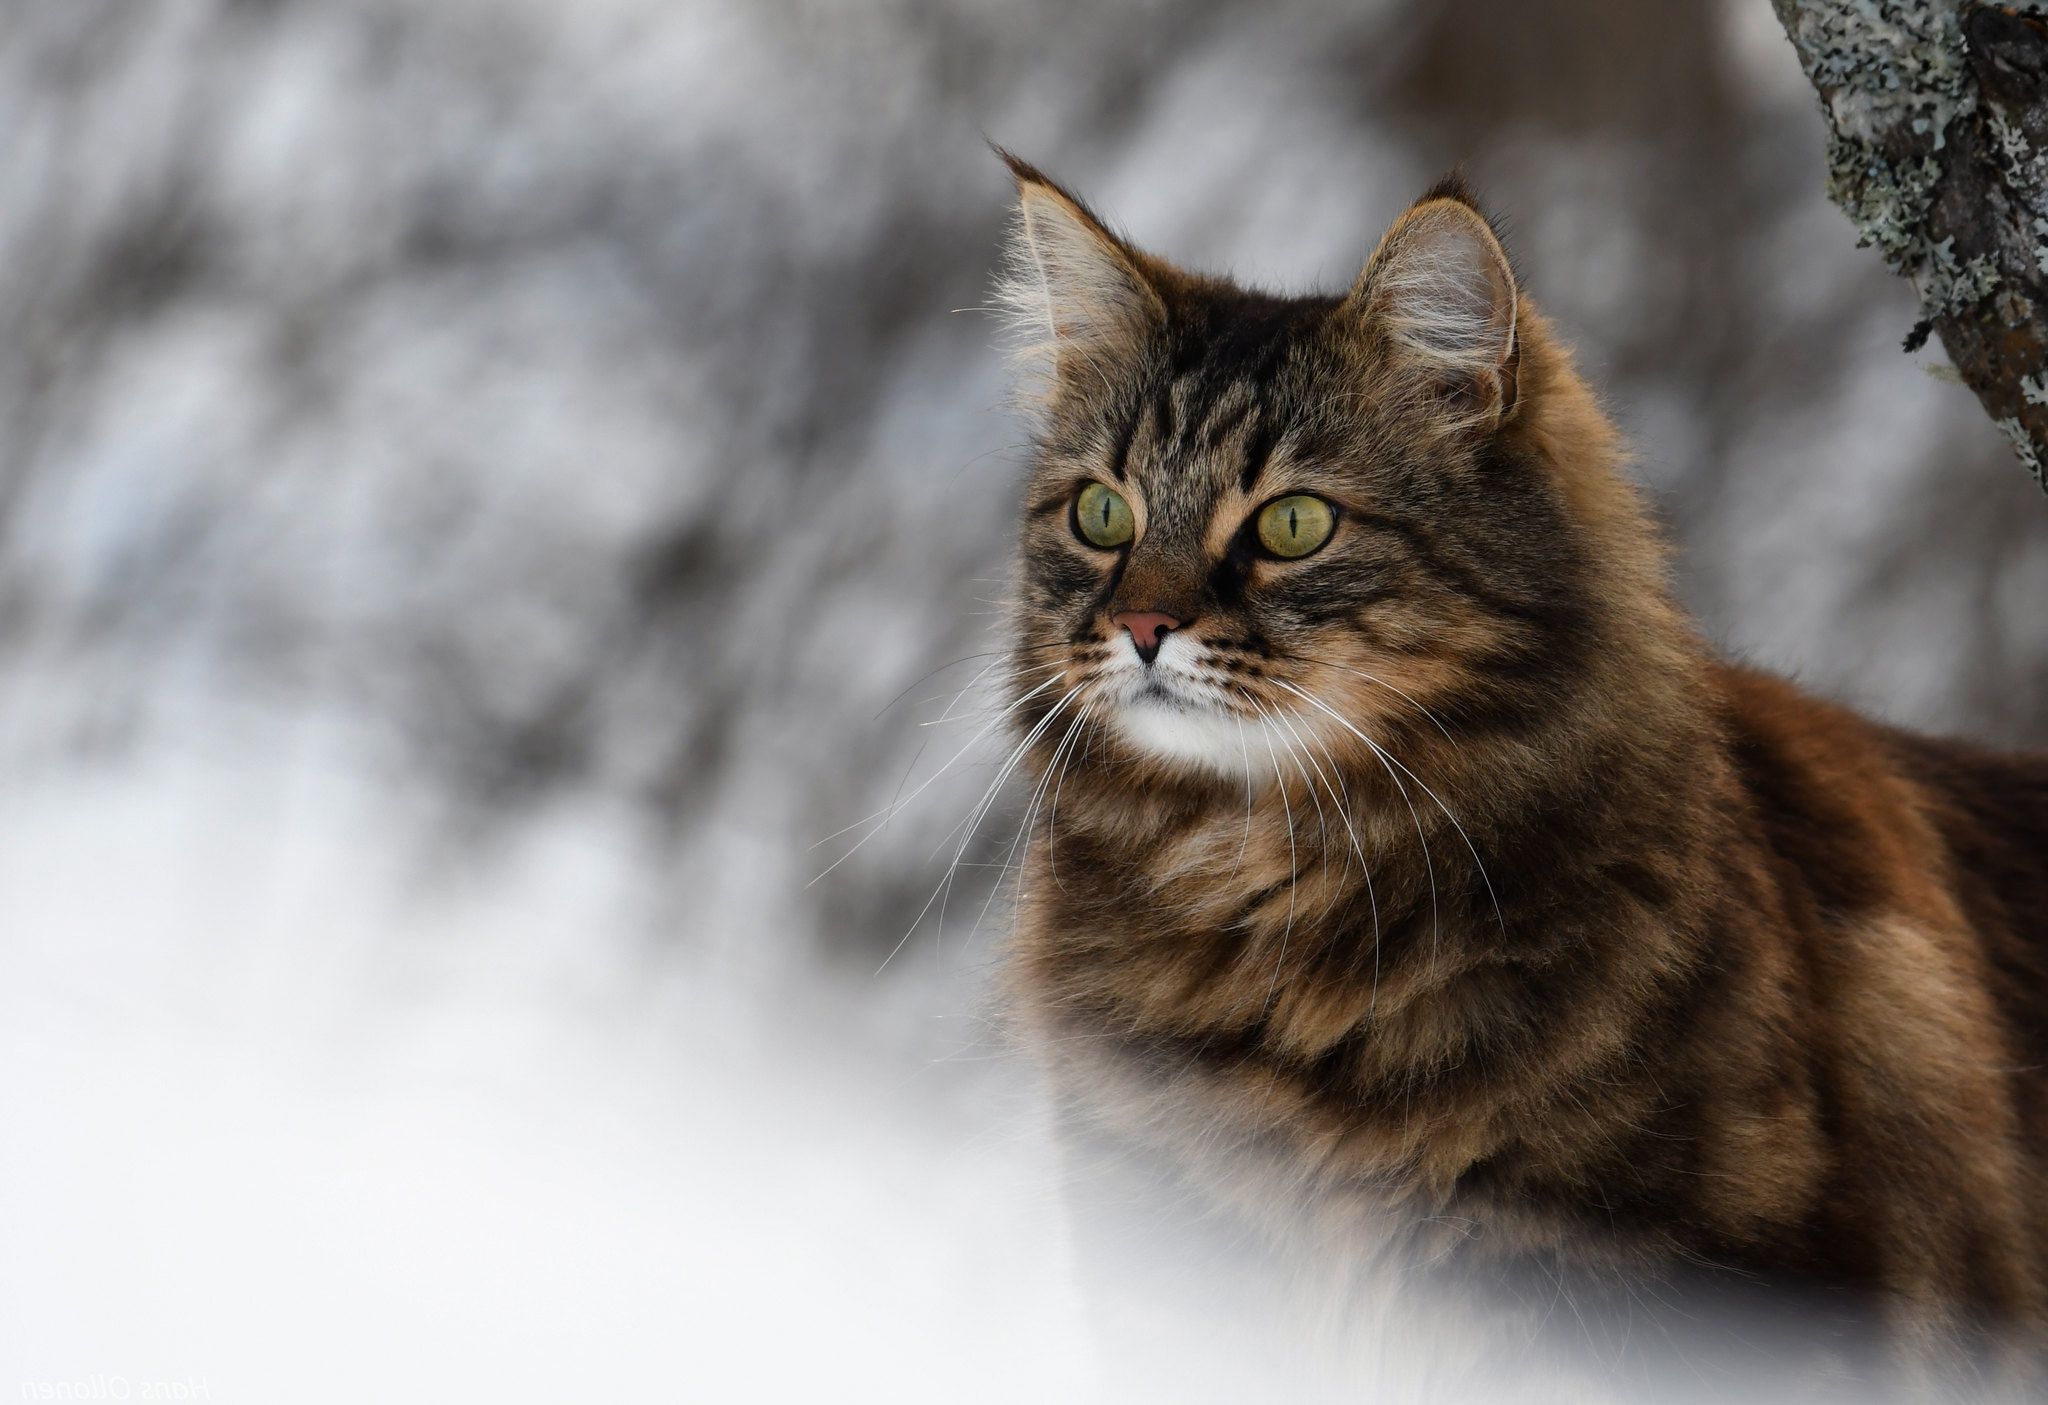 A cat with green eyes sitting in the snow. - Cat